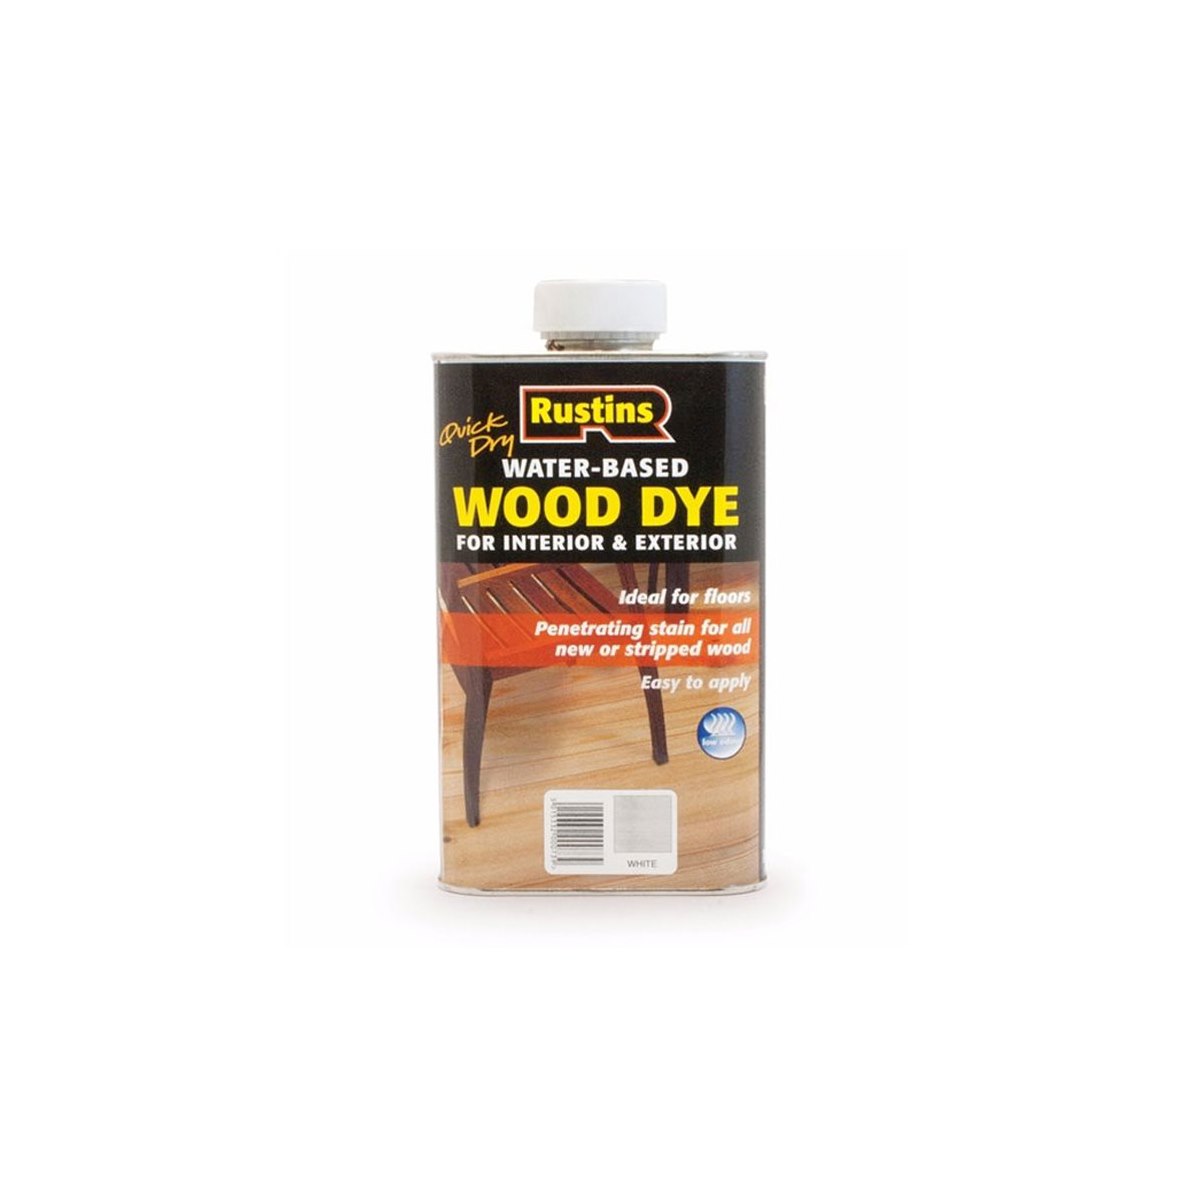 Rustins Quick Dry Water Based Wood Dye White 1 Litre